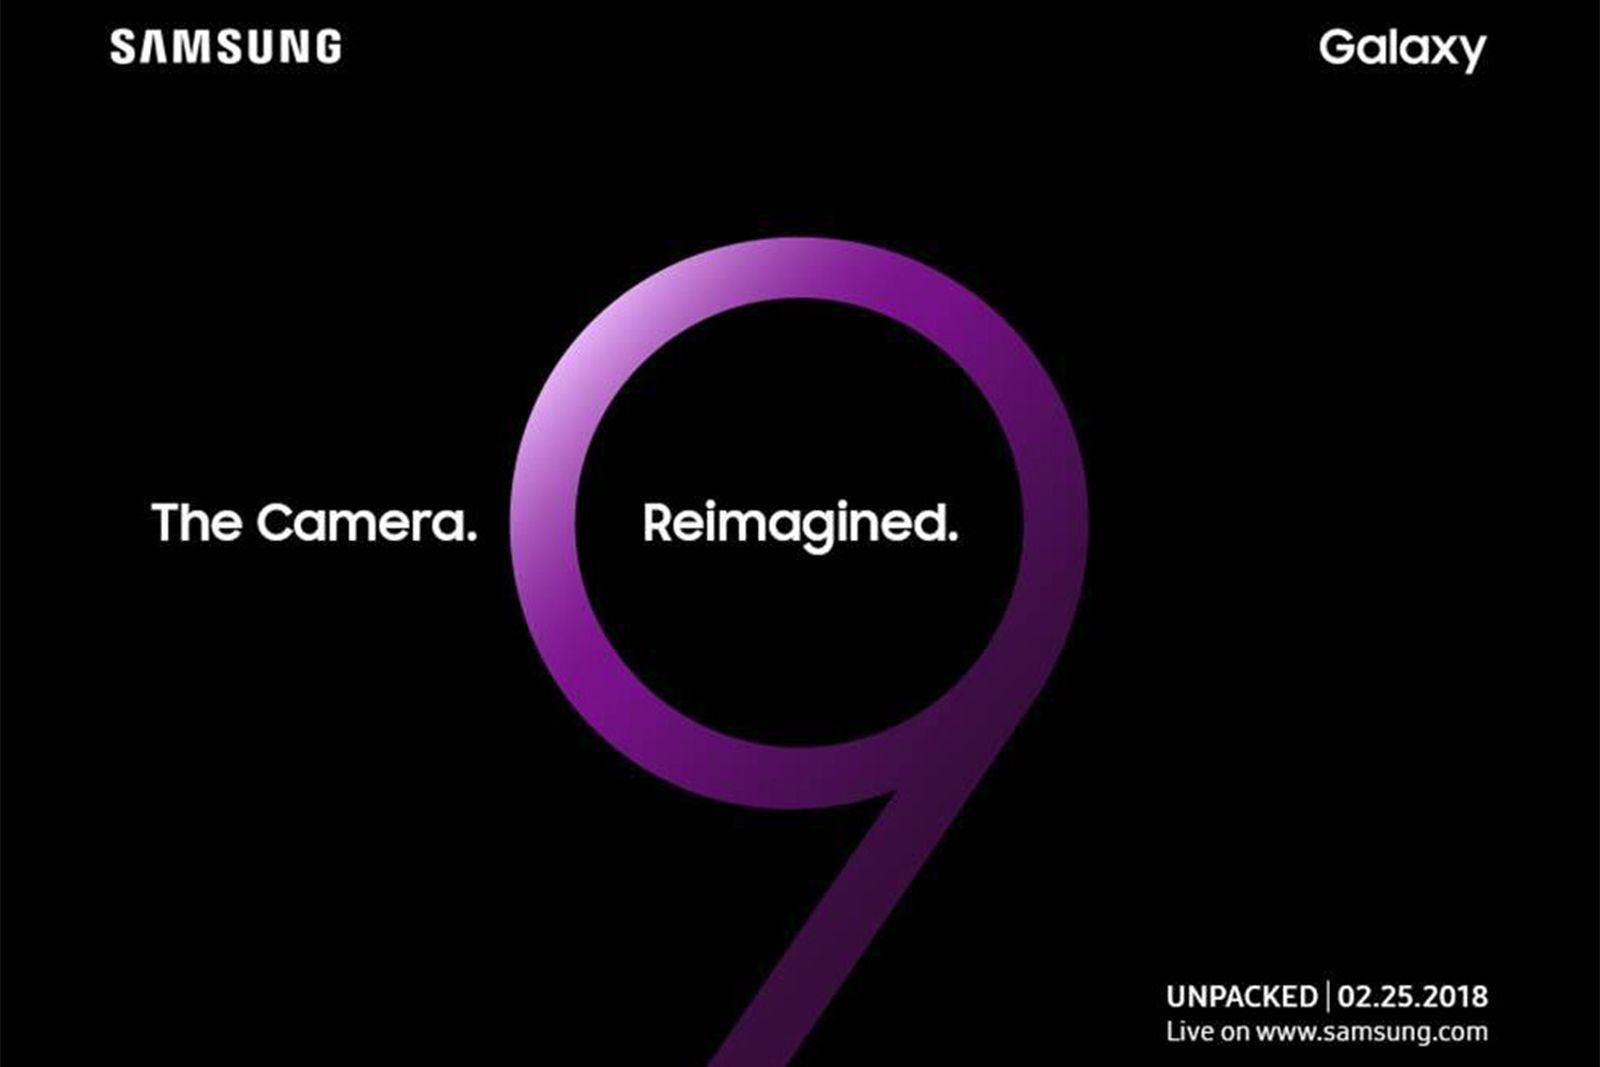 Samsung Unpacked invite confirms Galaxy S9 launch date image 1